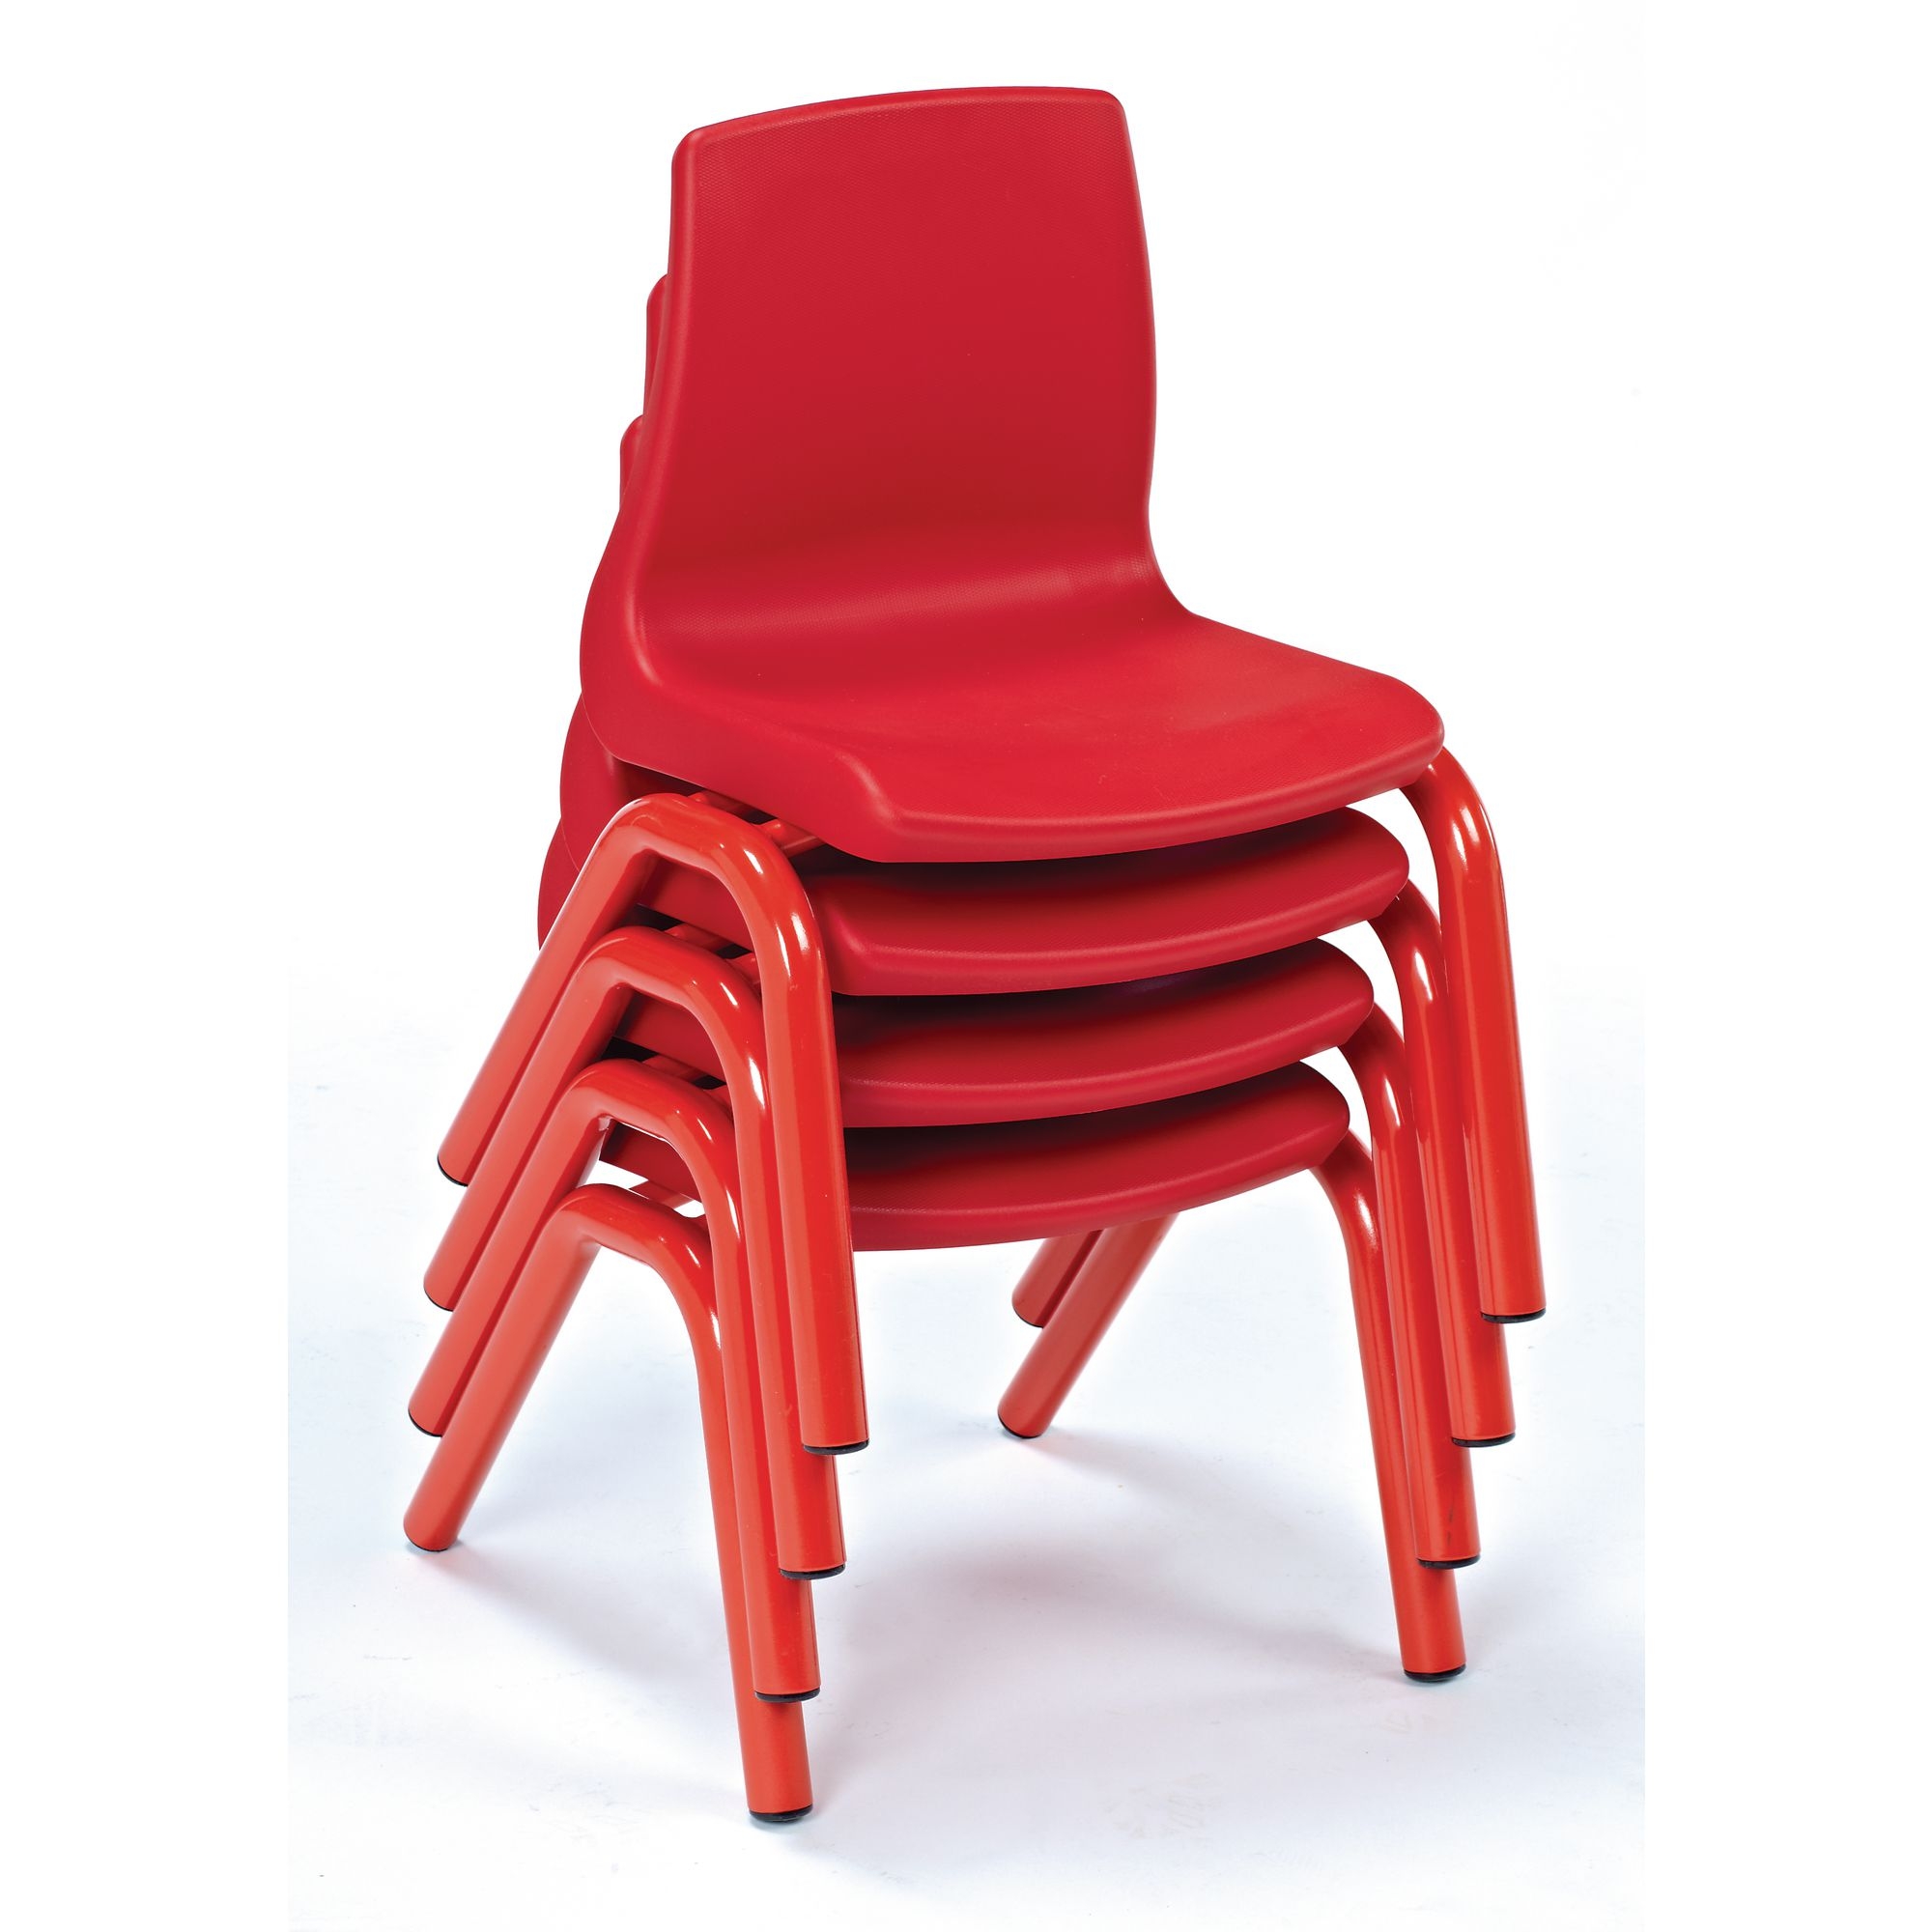 Harlequin Chairs - Pre School - Seat height: 200mm - Red